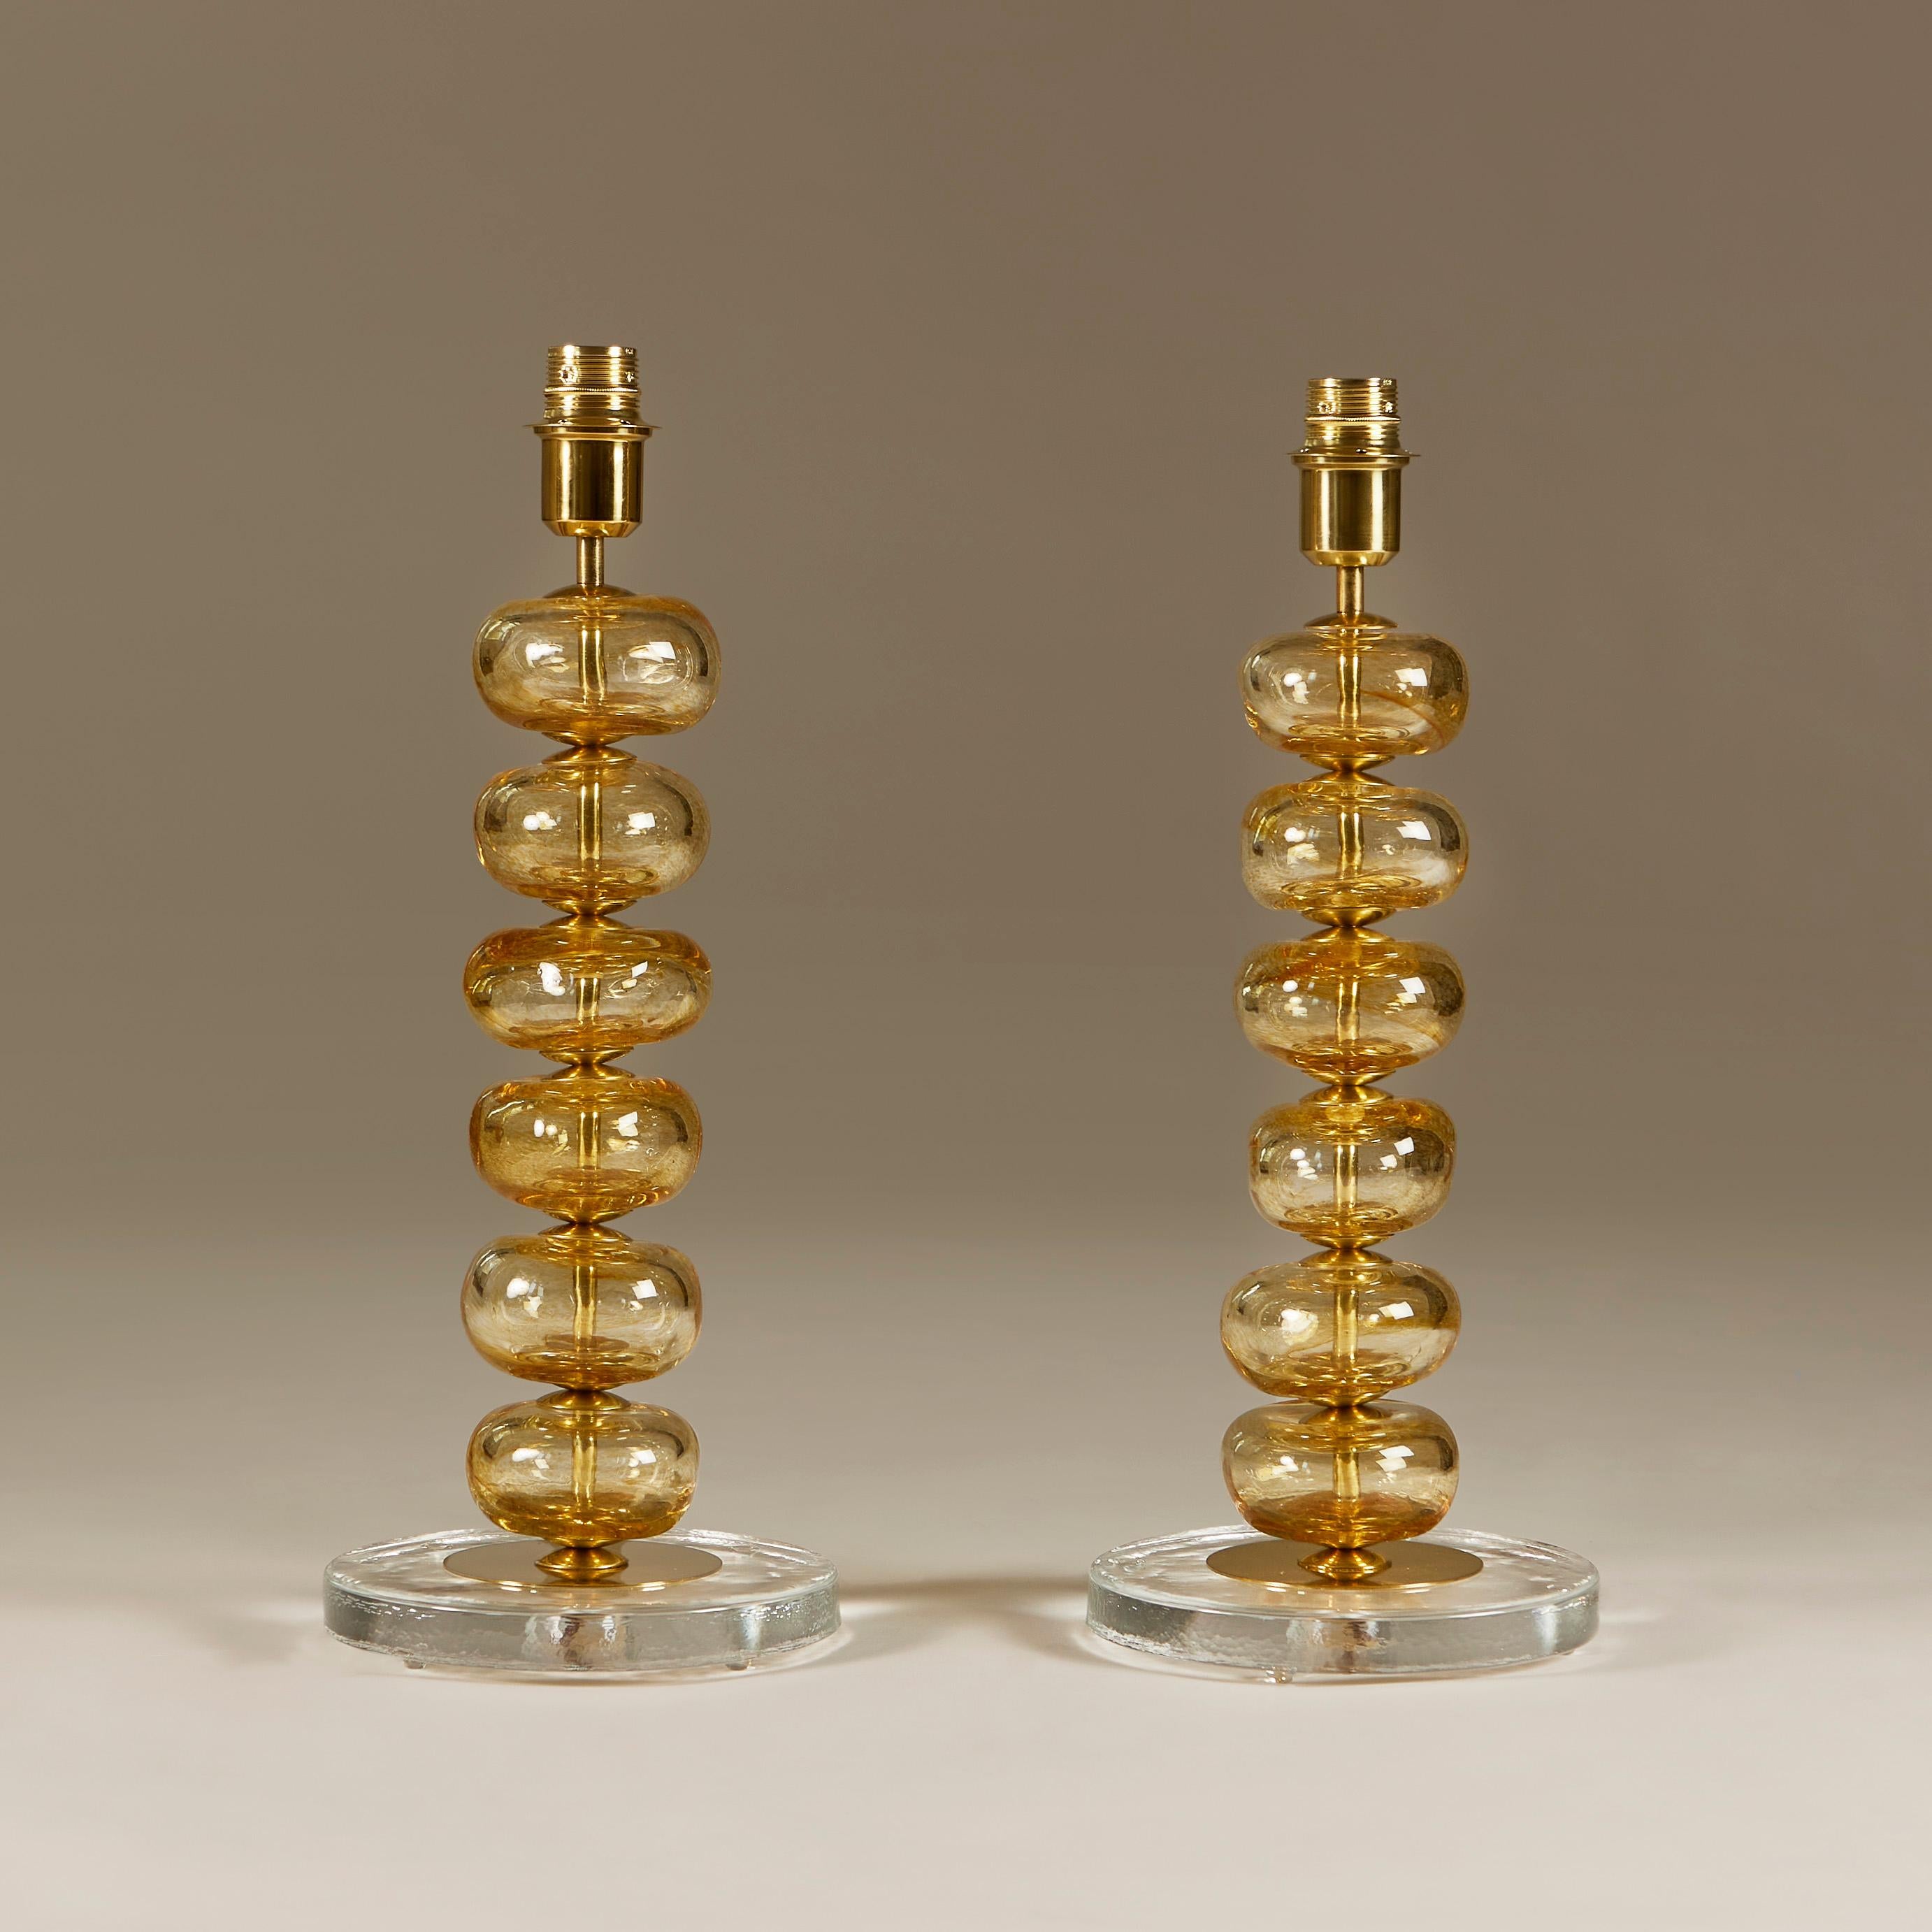 Elegant pair of table lamps each consisting of six handblown soft gold sculptured Murano glass disks interspersed with brass detailing. Sits on circular clear glass and brass base.

Due to the handmade nature of the glass no two pieces are exactly